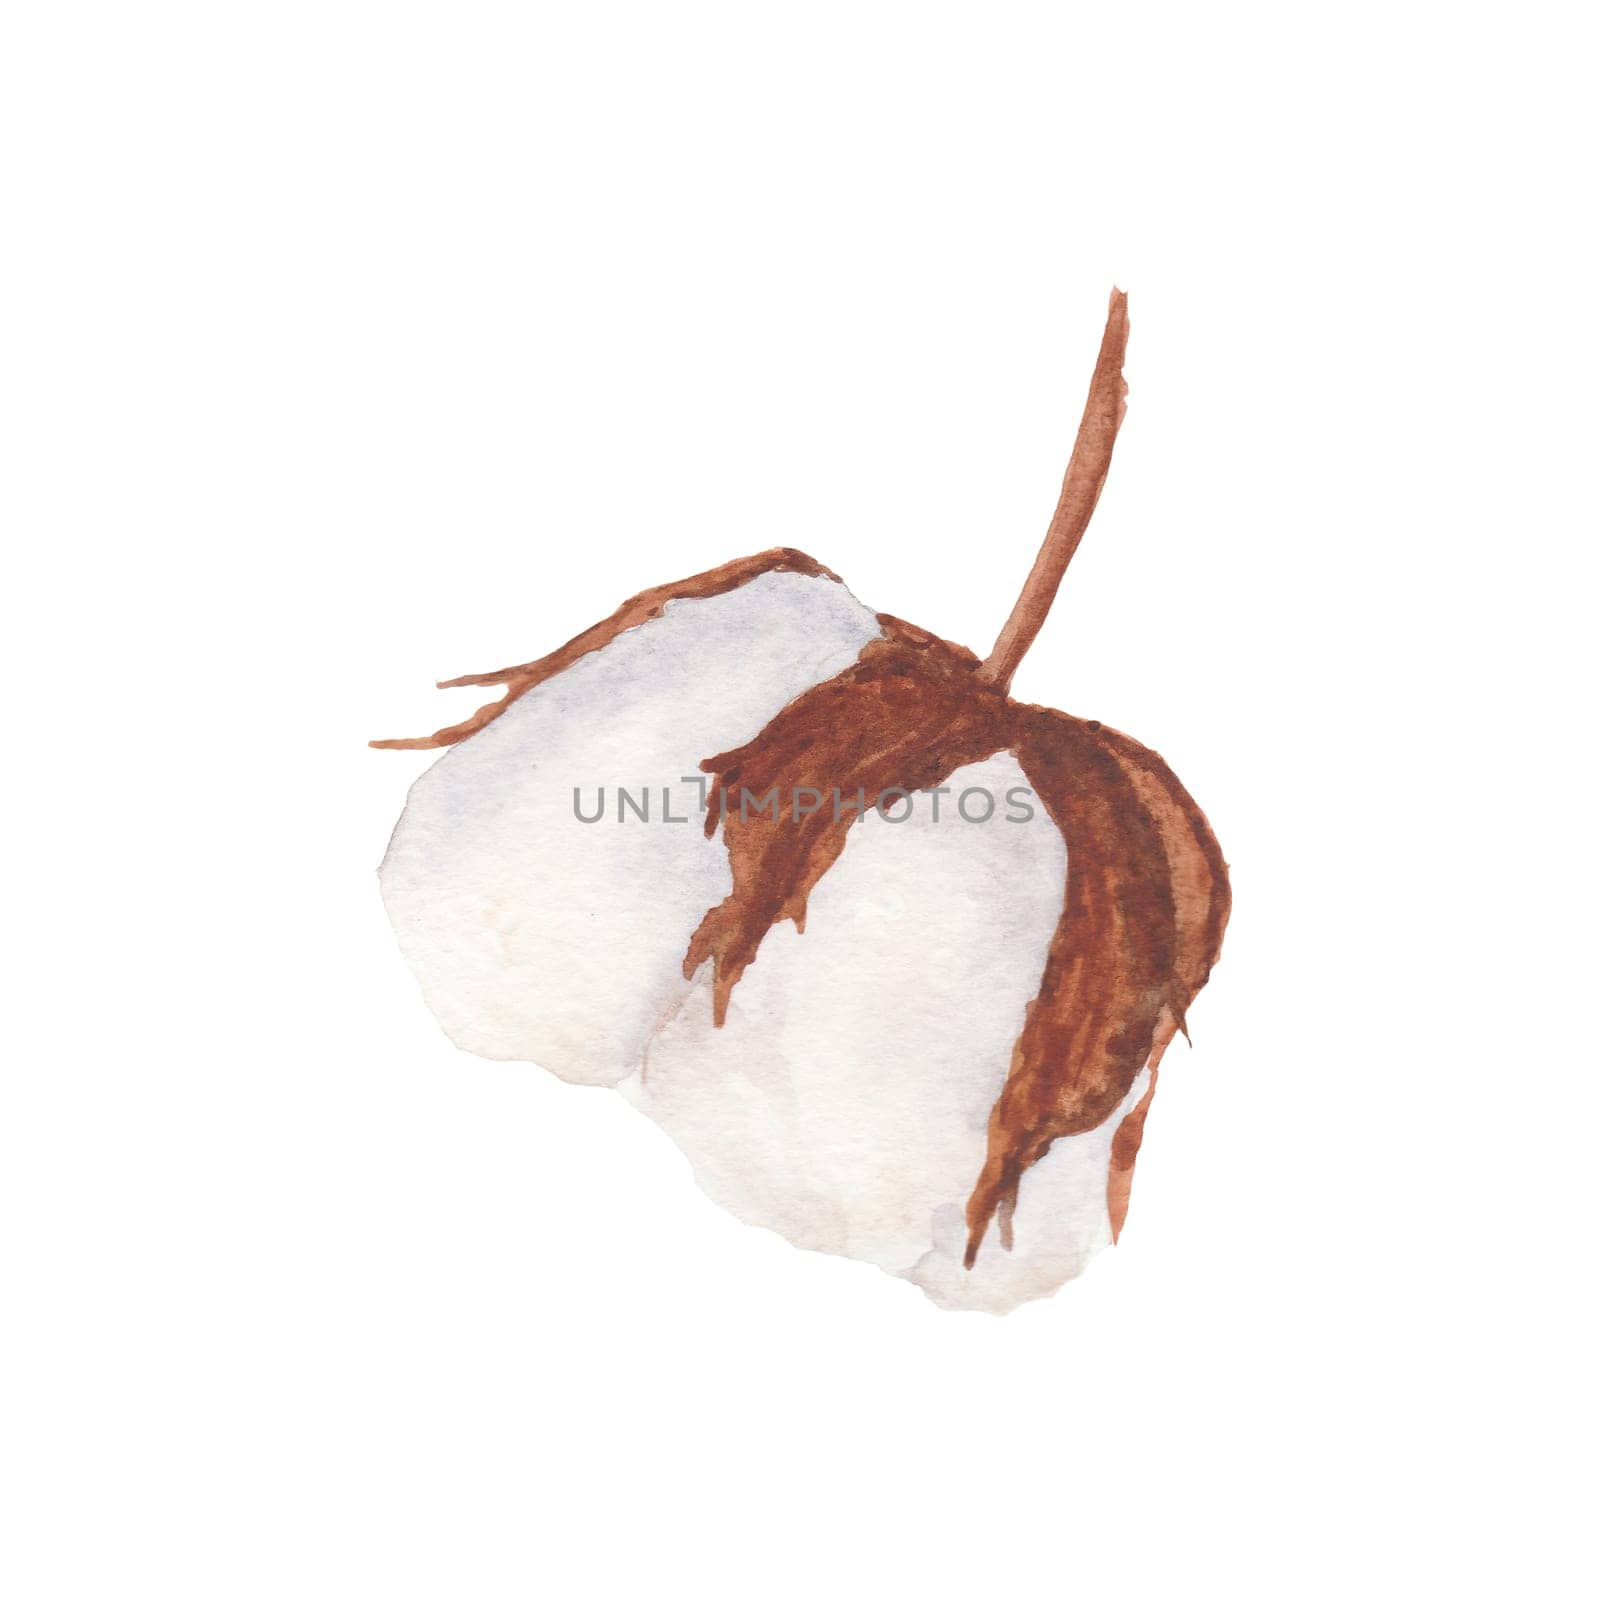 Cotton boll watercolor illustration isolated on white background. by florainlove_art